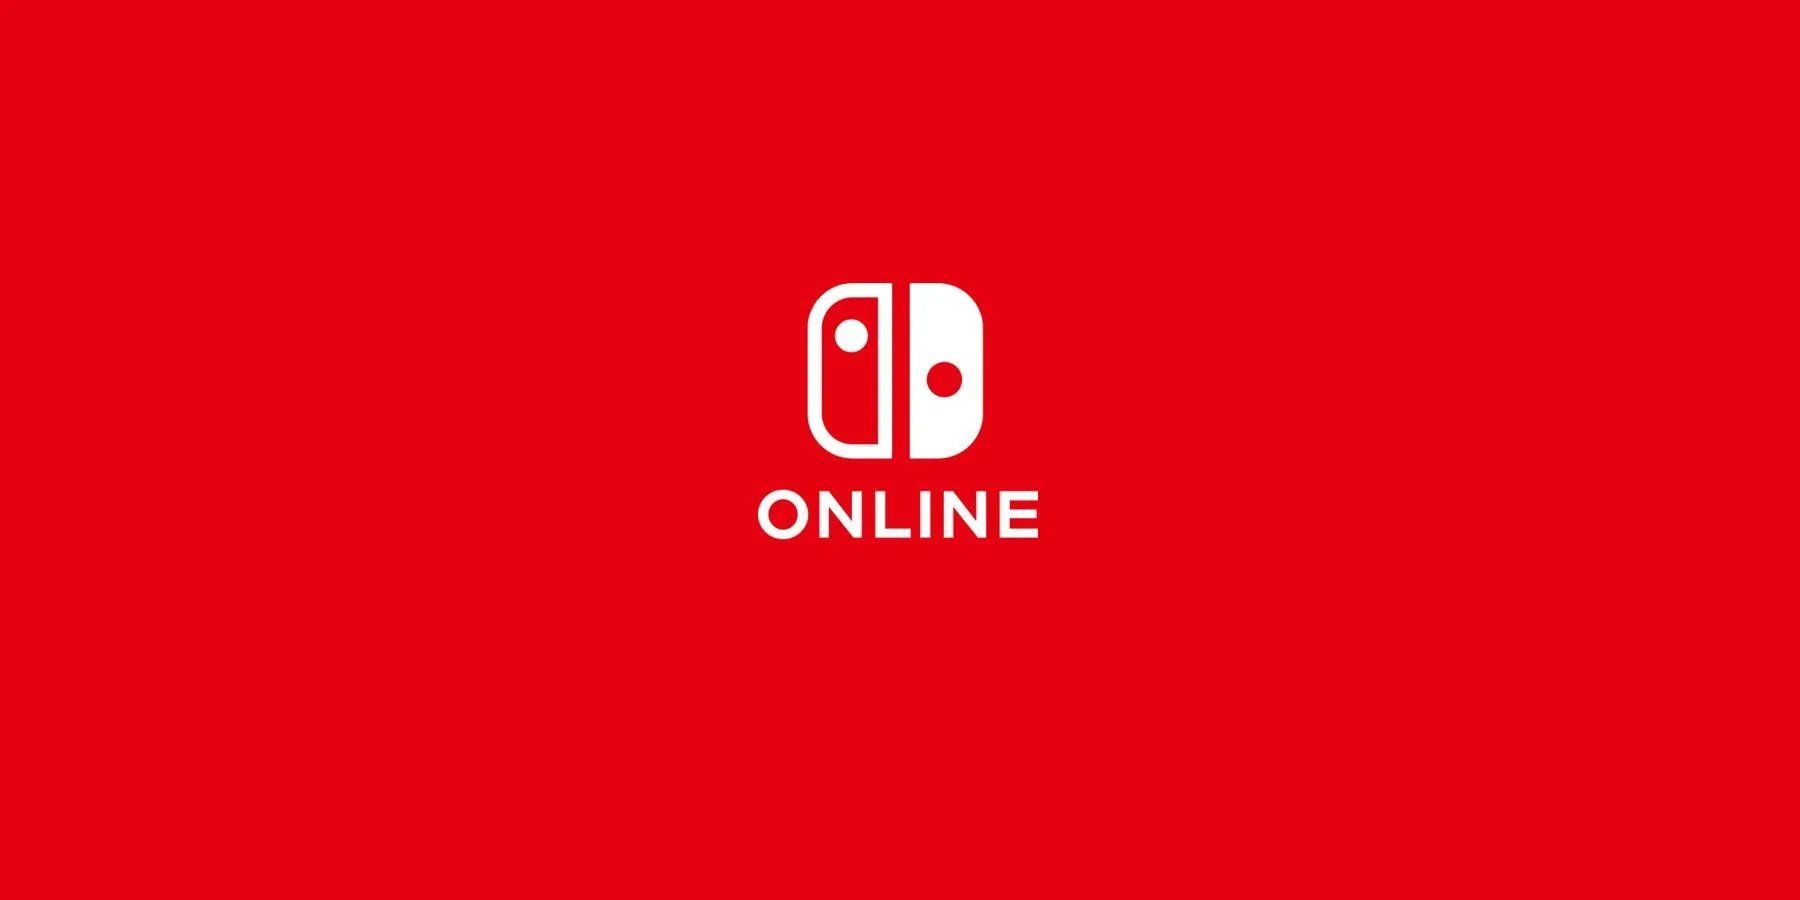 amazon, nintendo switch online reveals limited-time free game trial for subscribers